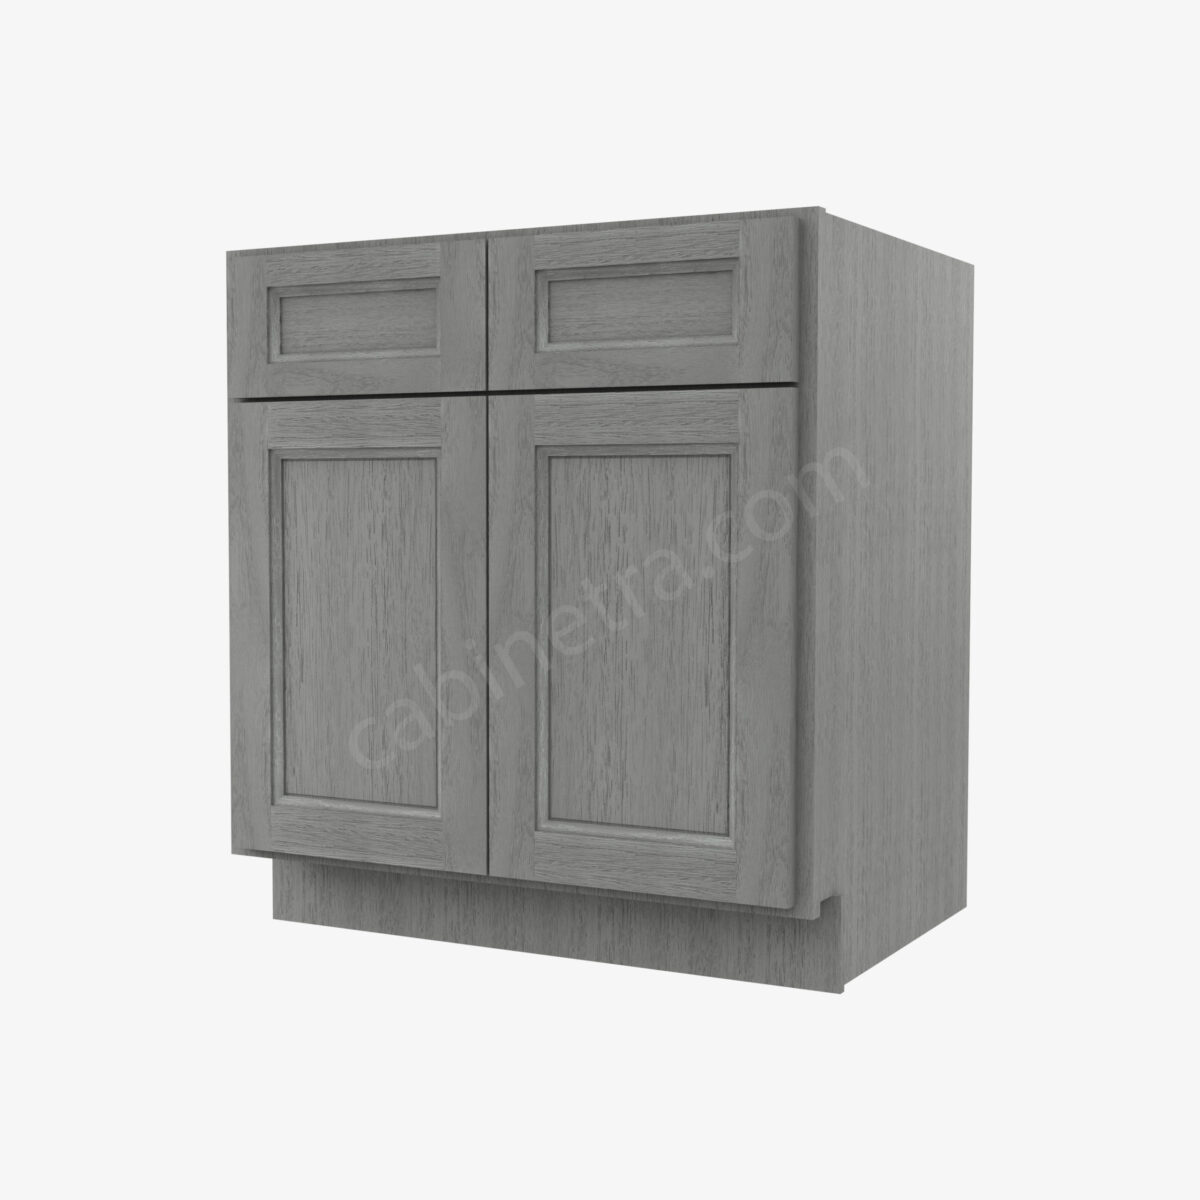 TG B30B 0 Forevermark Midtown Grey Cabinetra scaled